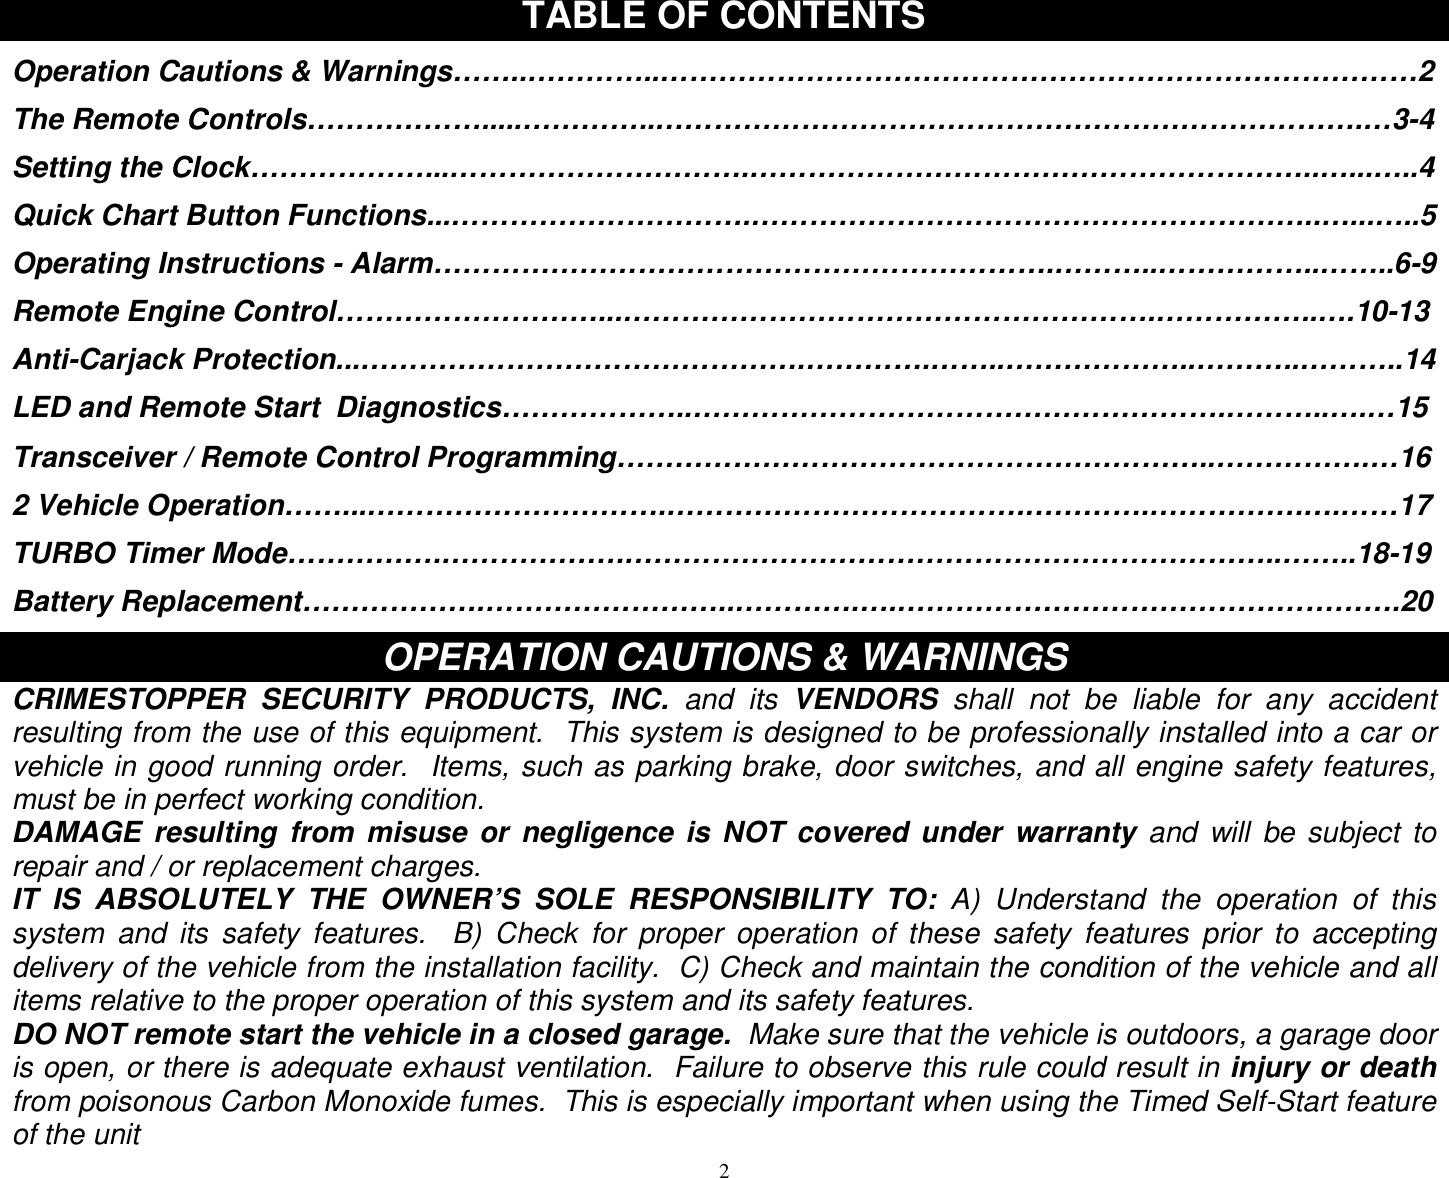  2TABLE OF CONTENTS  Operation Cautions &amp; Warnings……..…………..……………………………………………………………………2  The Remote Controls……………….....…………..……………………………………………………………….…3-4  Setting the Clock………………...………………………….…………………………………………………..…...…..4  Quick Chart Button Functions...………………………….…………………………………………………..…...…..5  Operating Instructions - Alarm……………………………………………………….………..……………..……..6-9  Remote Engine Control………………………...……………………………………………….……………..….10-13  Anti-Carjack Protection...……………………………………….………….……..………………..………..………..14  LED and Remote Start  Diagnostics………………..……………………………………………….………..….…15  Transceiver / Remote Control Programming……………………………………………………..…………….…16  2 Vehicle Operation……...………………………….……………………………….………….…………….….……17  TURBO Timer Mode…………….……………….…………………………………………………………..……..18-19  Battery Replacement……………….……………………..………….….…………………………………………….20  OPERATION CAUTIONS &amp; WARNINGS CRIMESTOPPER SECURITY PRODUCTS, INC. and its  VENDORS shall not be liable for any accident resulting from the use of this equipment.  This system is designed to be professionally installed into a car or vehicle in good running order.  Items, such as parking brake, door switches, and all engine safety features, must be in perfect working condition. DAMAGE resulting from misuse or negligence is NOT covered under warranty  and will be subject to repair and / or replacement charges. IT IS ABSOLUTELY THE OWNER’S SOLE RESPONSIBILITY TO:  A) Understand the operation of this system and its safety features.  B) Check for proper operation of these safety features prior to accepting delivery of the vehicle from the installation facility.  C) Check and maintain the condition of the vehicle and all items relative to the proper operation of this system and its safety features. DO NOT remote start the vehicle in a closed garage.  Make sure that the vehicle is outdoors, a garage door is open, or there is adequate exhaust ventilation.  Failure to observe this rule could result in injury or death from poisonous Carbon Monoxide fumes.  This is especially important when using the Timed Self-Start feature of the unit 